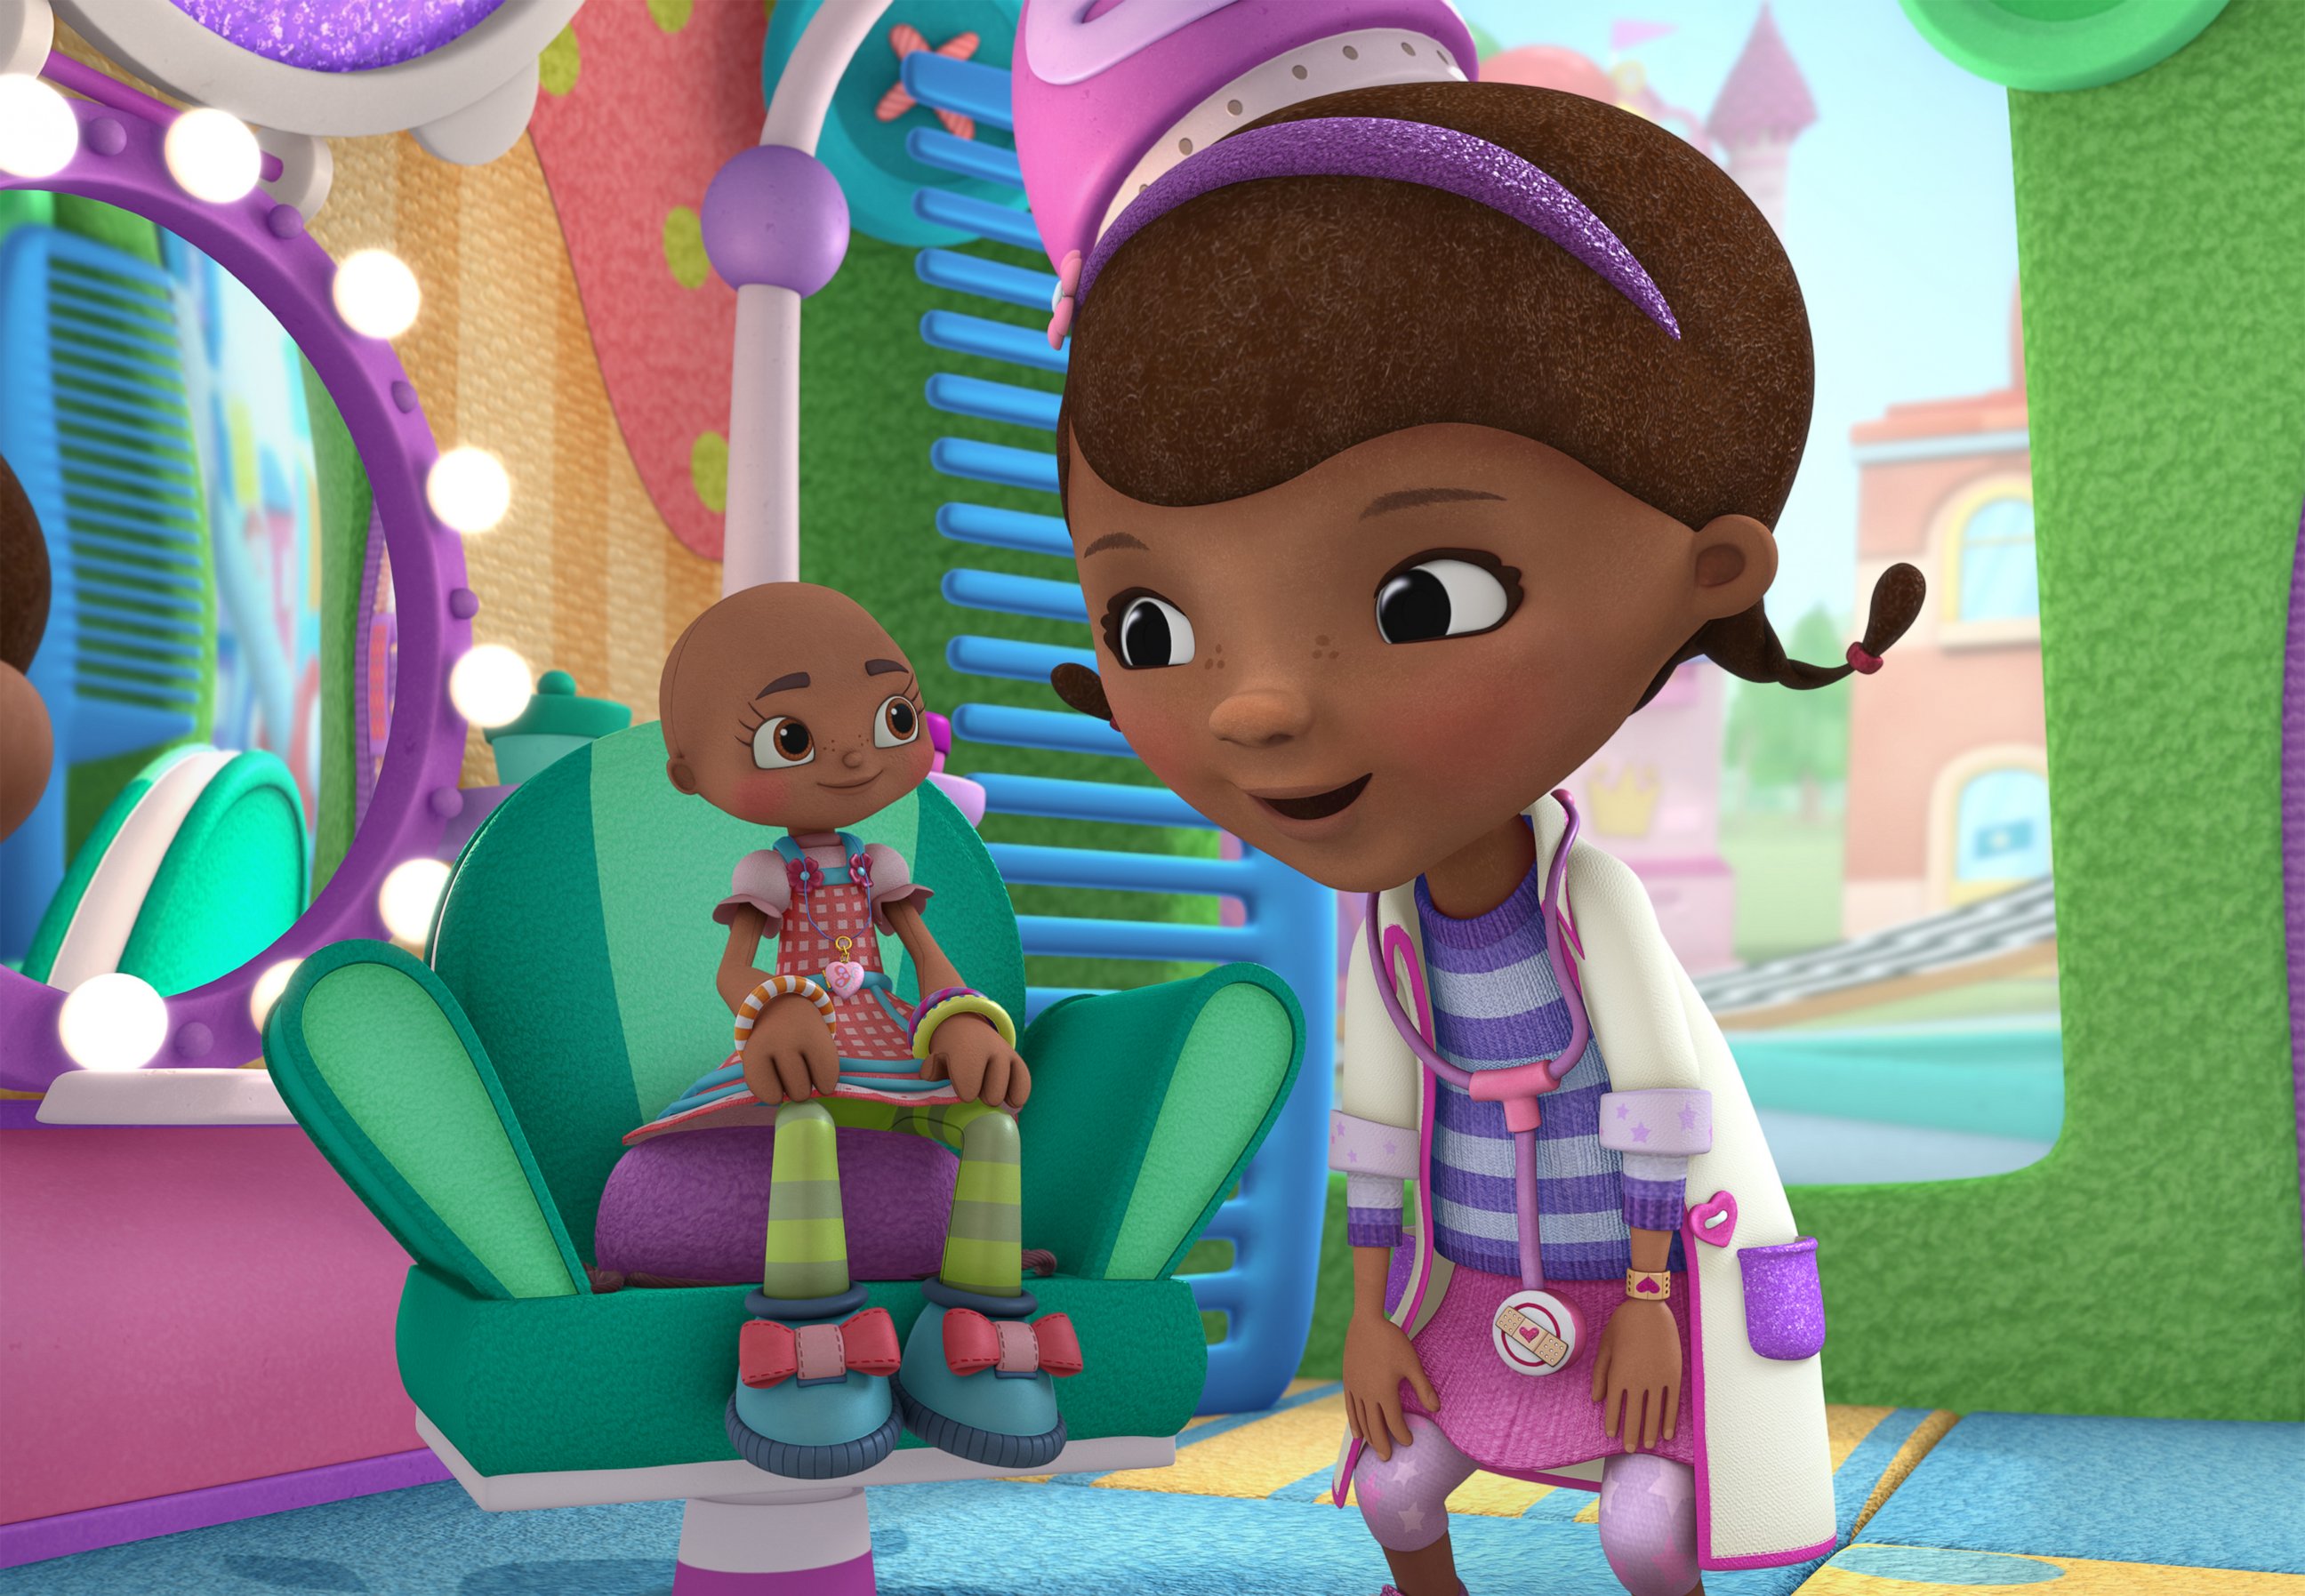 Robin Roberts voices character on 'Doc McStuffins' for National Cancer  Survivor's Day - ABC News